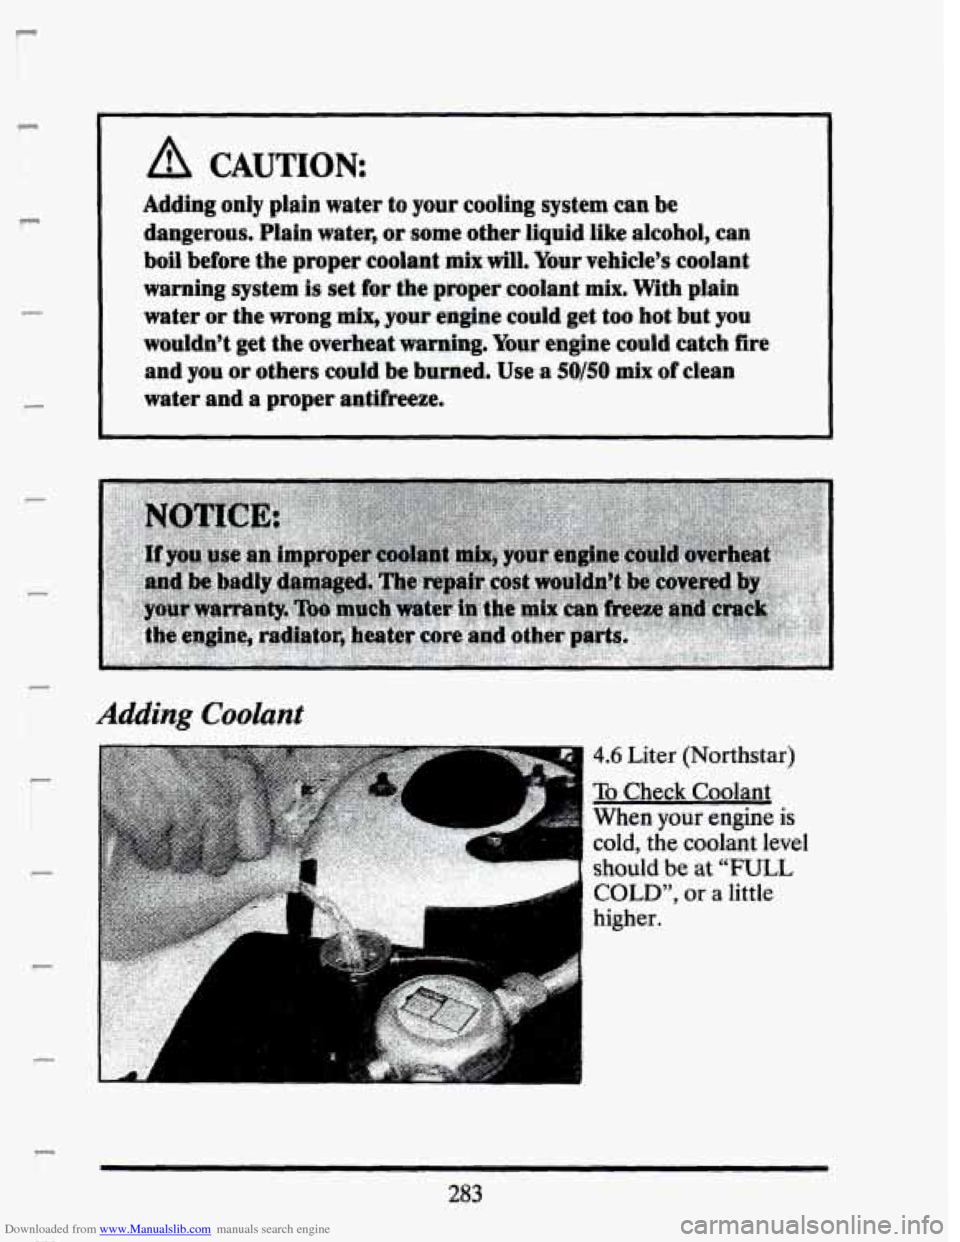 CADILLAC SEVILLE 1993 4.G Owners Manual Downloaded from www.Manualslib.com manuals search engine r ir 
P 
P 
r 
P I 
A CAUTION 
Adding  only  plain water to your  cooling system can be 
dangerous.  Plain water,  or some  other  liquid  like